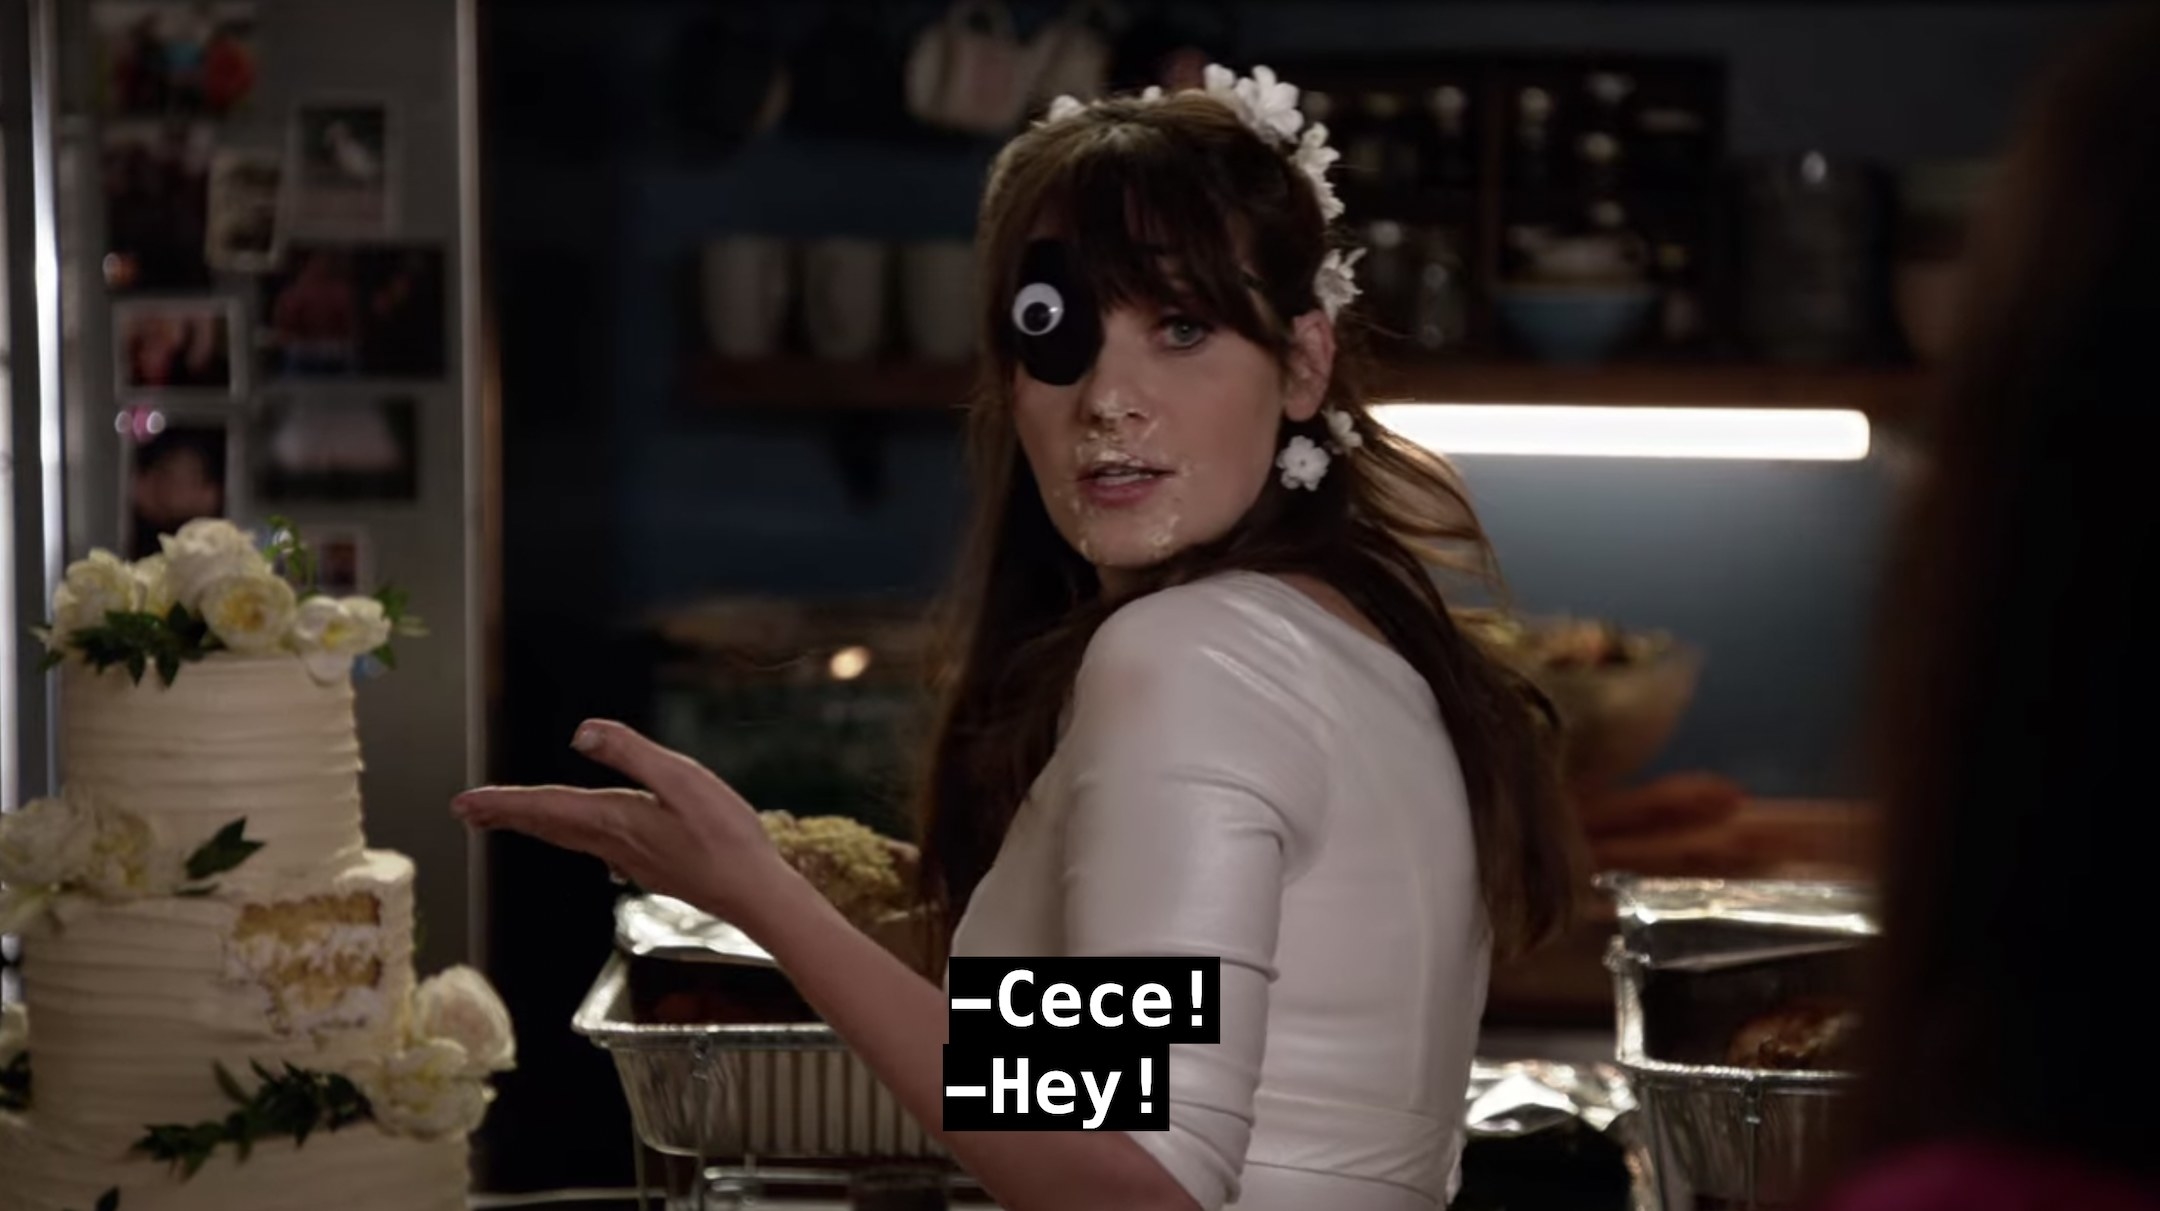 Jess turns around, wearing an eye patch with a googly eye on it, holding a piece of the middle of her wedding cake, with cake all around her mouth, and says Cece